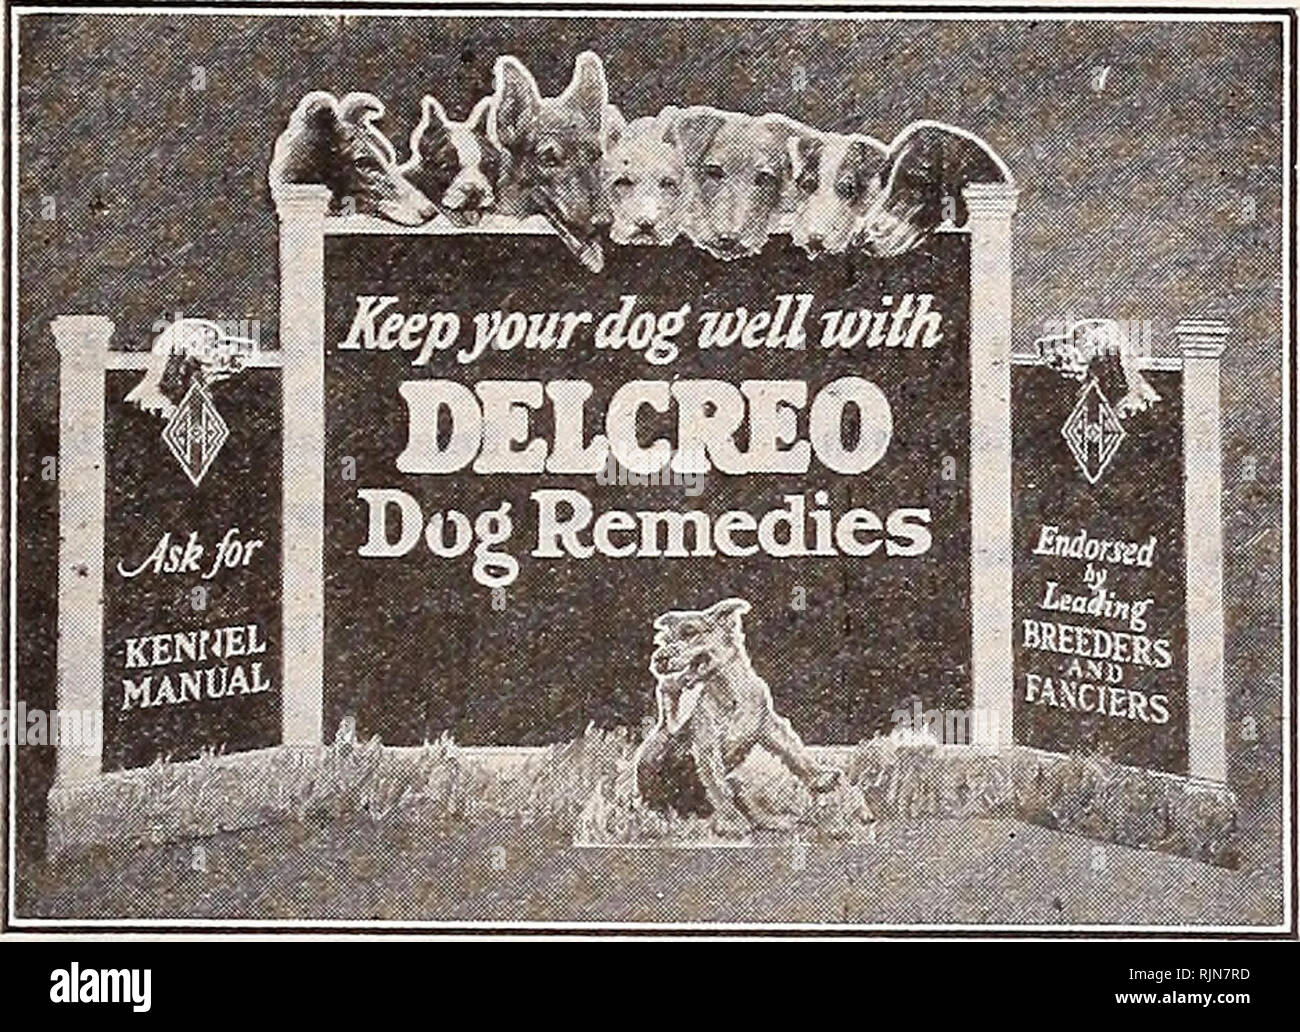 . Bailey's seeds : above them all. BAILEY &amp; SONS CO., Salt Lake City, Utah Page 65 DELCREO DOG REMEDIES The latest and most successful means of combating disease among animals. Never fails when administered in time and according to directions. Used and recommended by the leading breeders and fanciers. The reputation which Delcreo Dog Remedies has gained throughout the United States is a sufficient guarantee of their excellence. COMPLETE LINE OF DELCREO DOG REMEDIES DELCREO. For distemper, pneumonia, black tongue, colds, diarrhoea, auto-intoxi- cation and other diseases of germ origin. A po Stock Photo